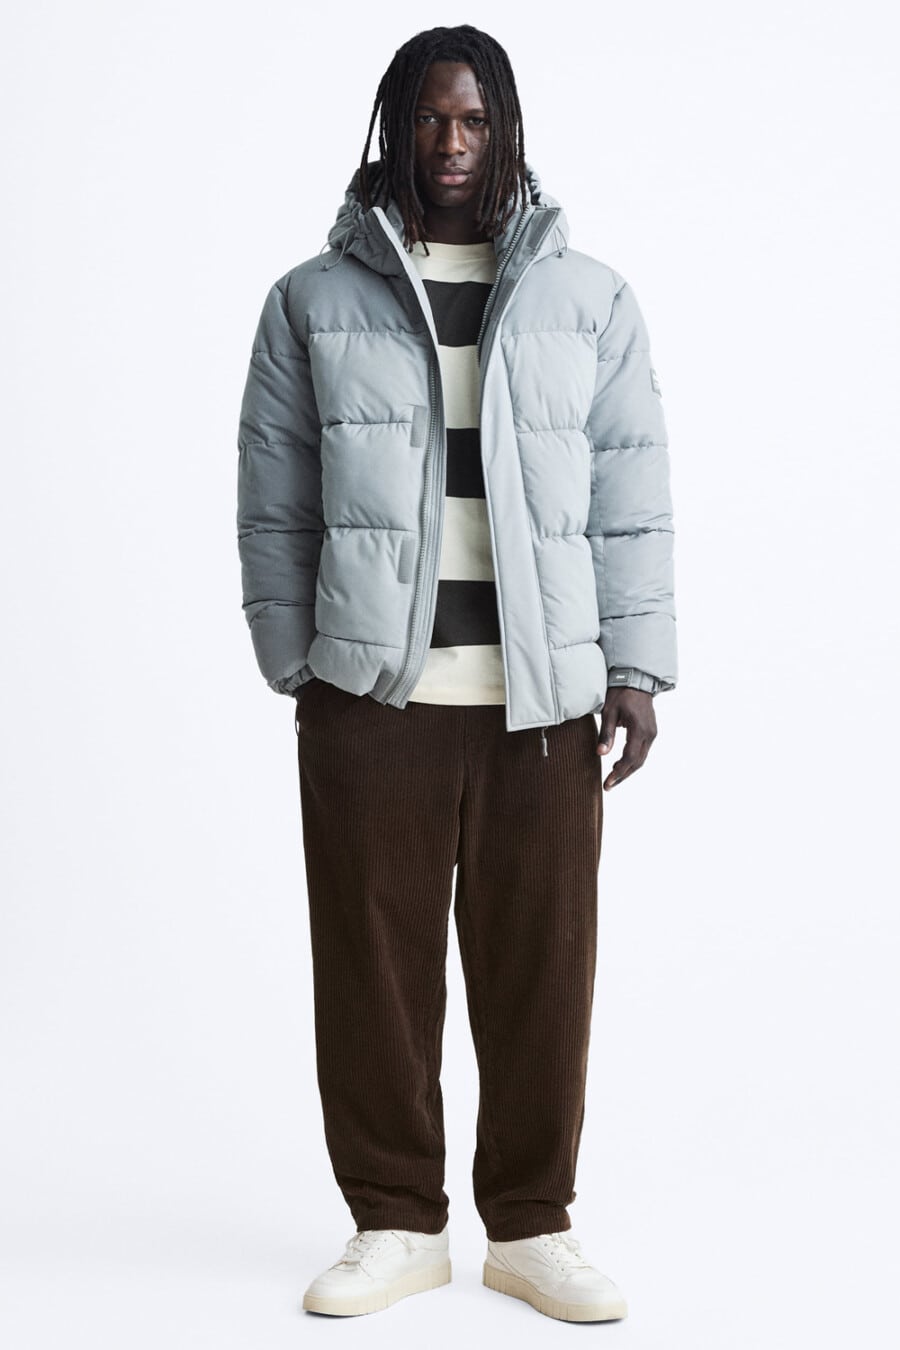 Men's wide-fit brwon pants, white/black striped top, light blue puffer jacket and chunky white sneakers outfit